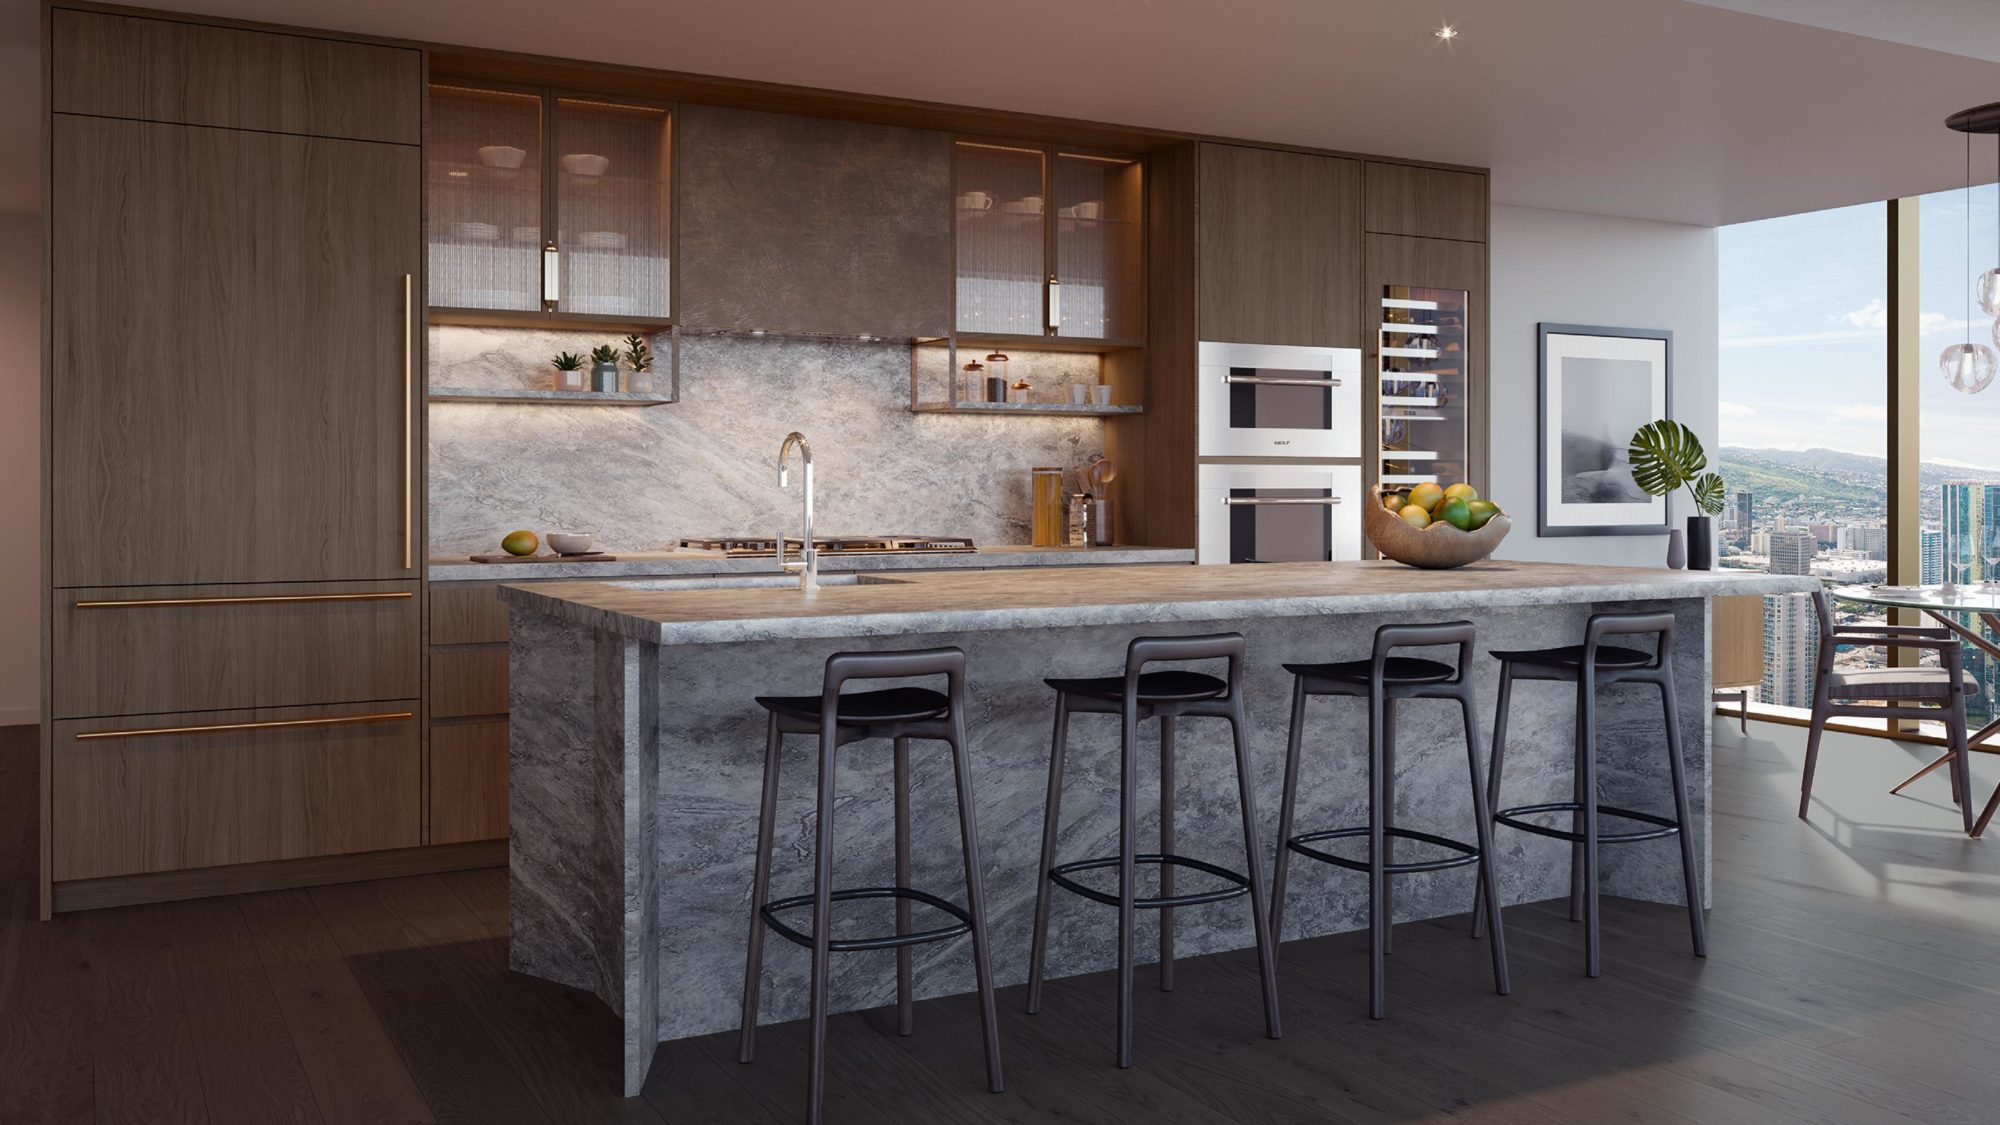 Kitchen in dark color scheme, featuring custom designed island with sophisticated fixtures and fininshes